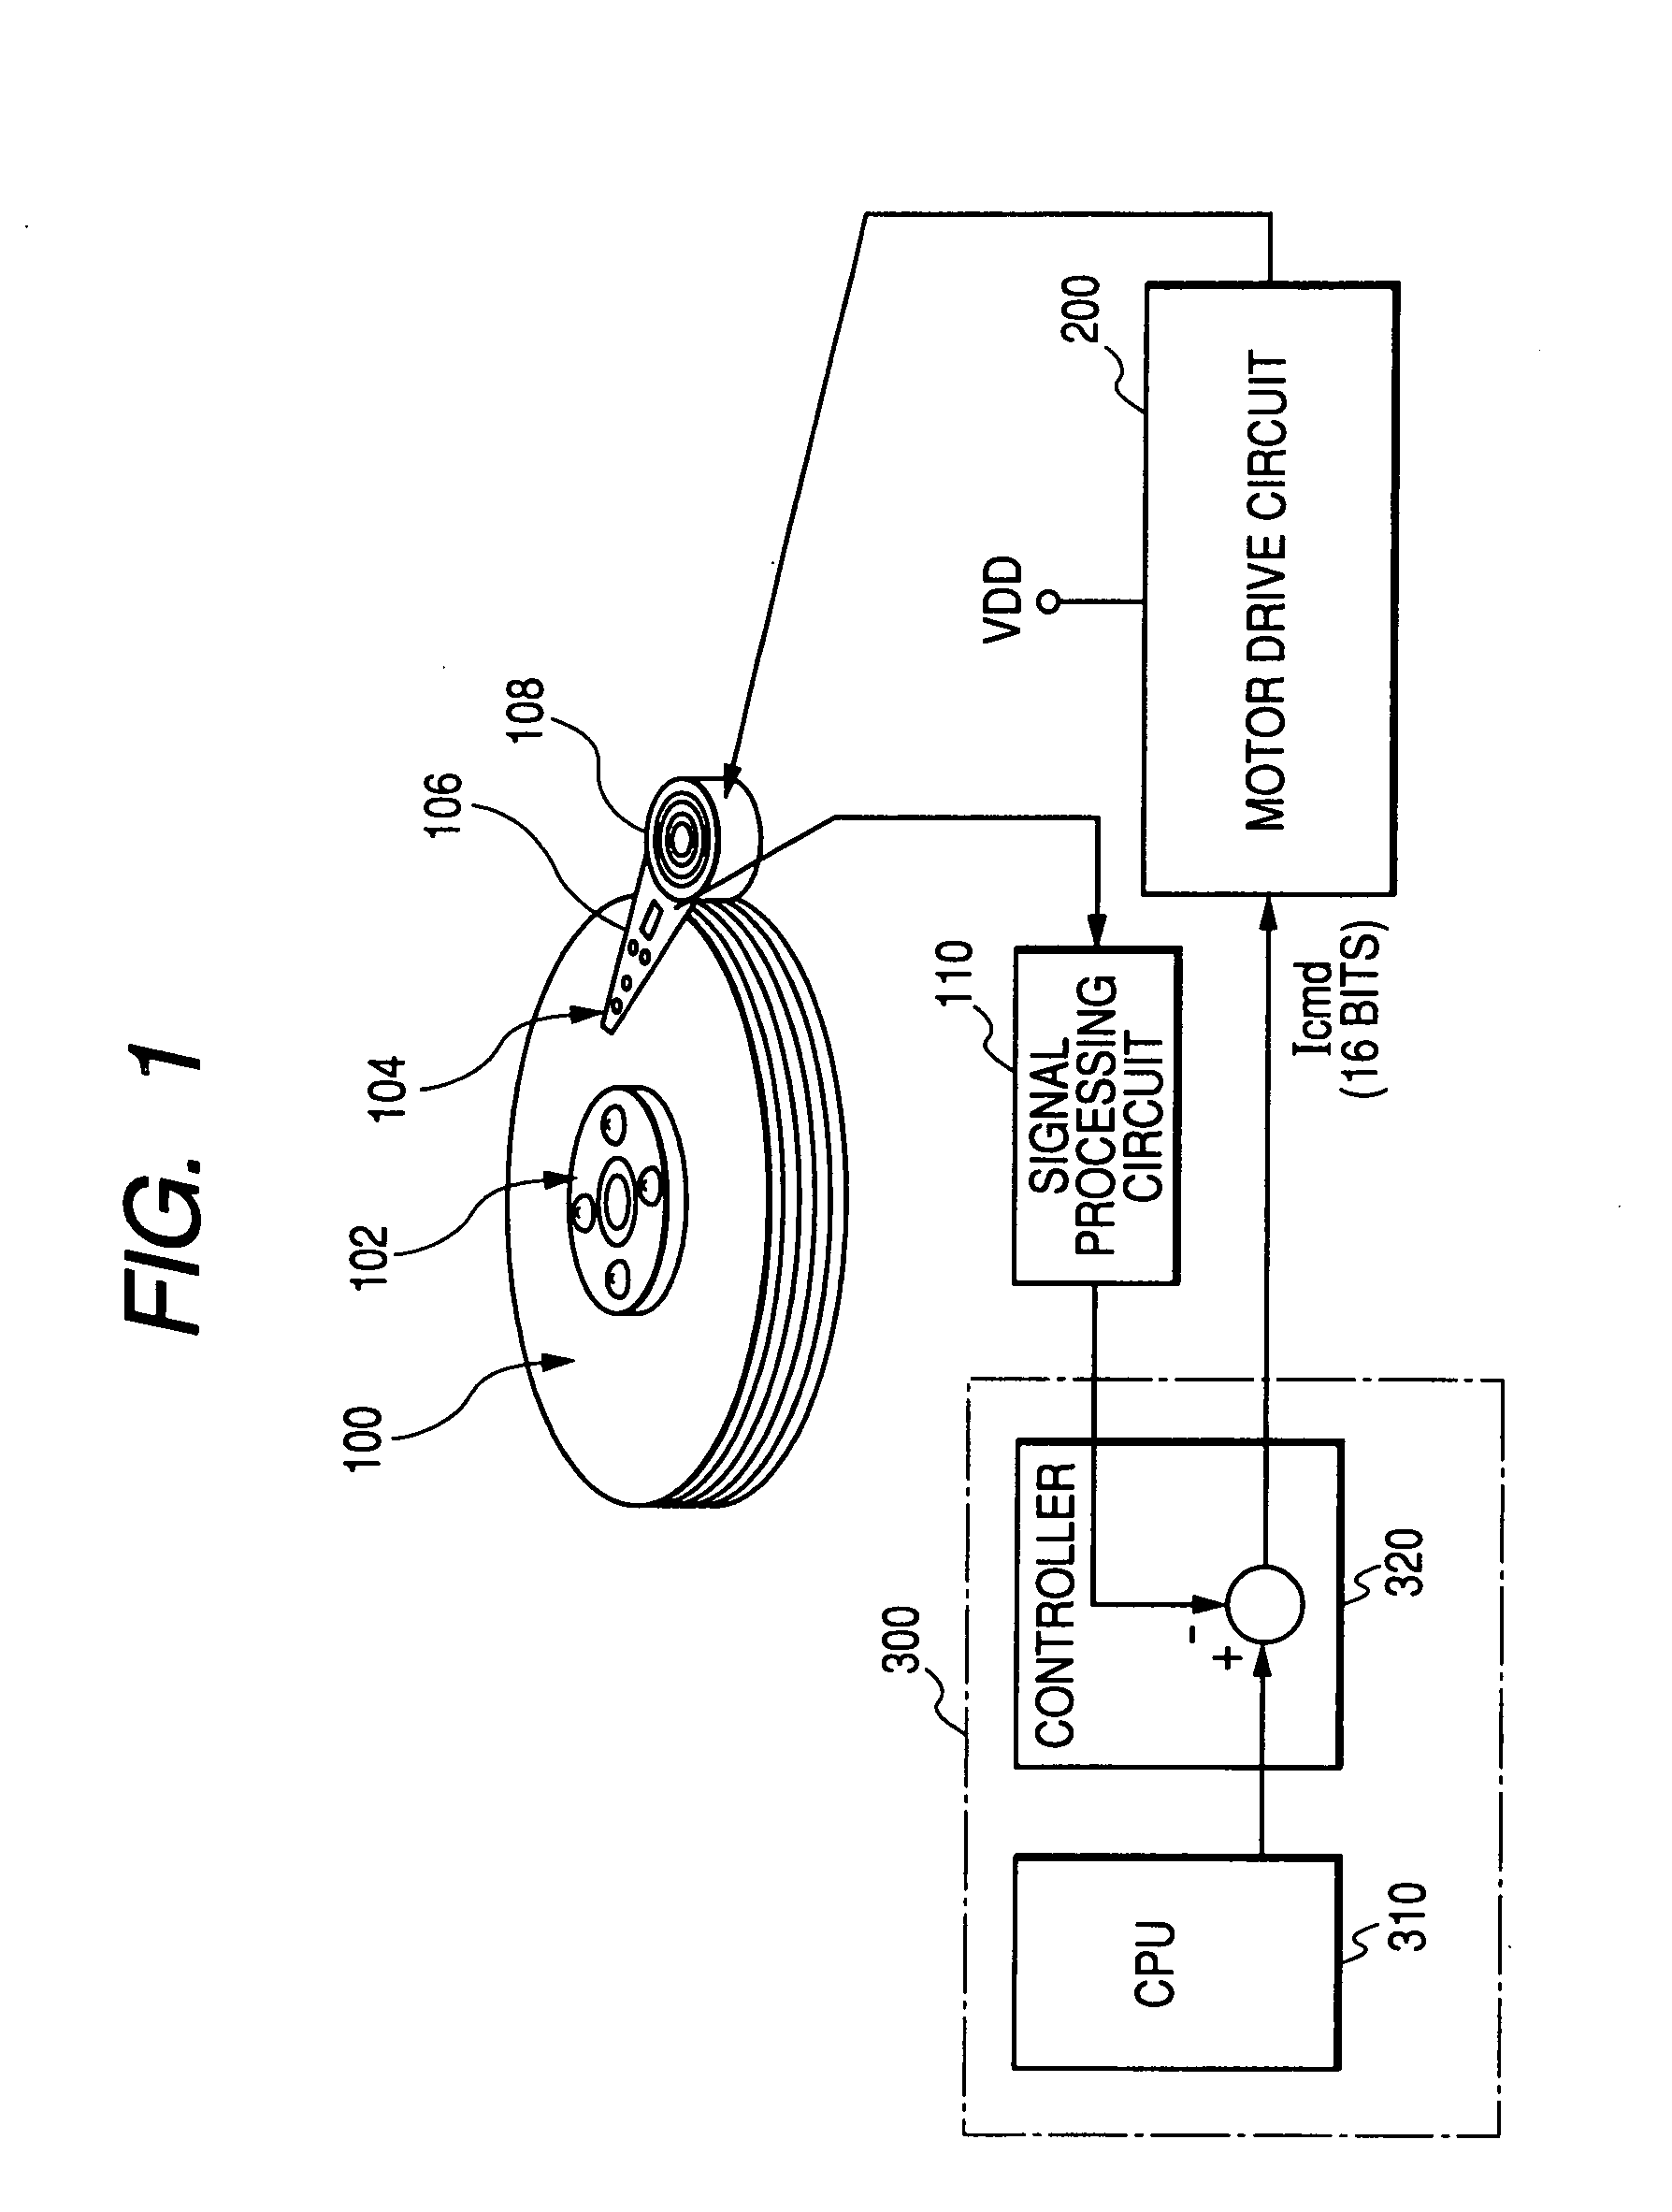 Motor drive semiconductor integrated circuit and magnetic disk storage apparatus